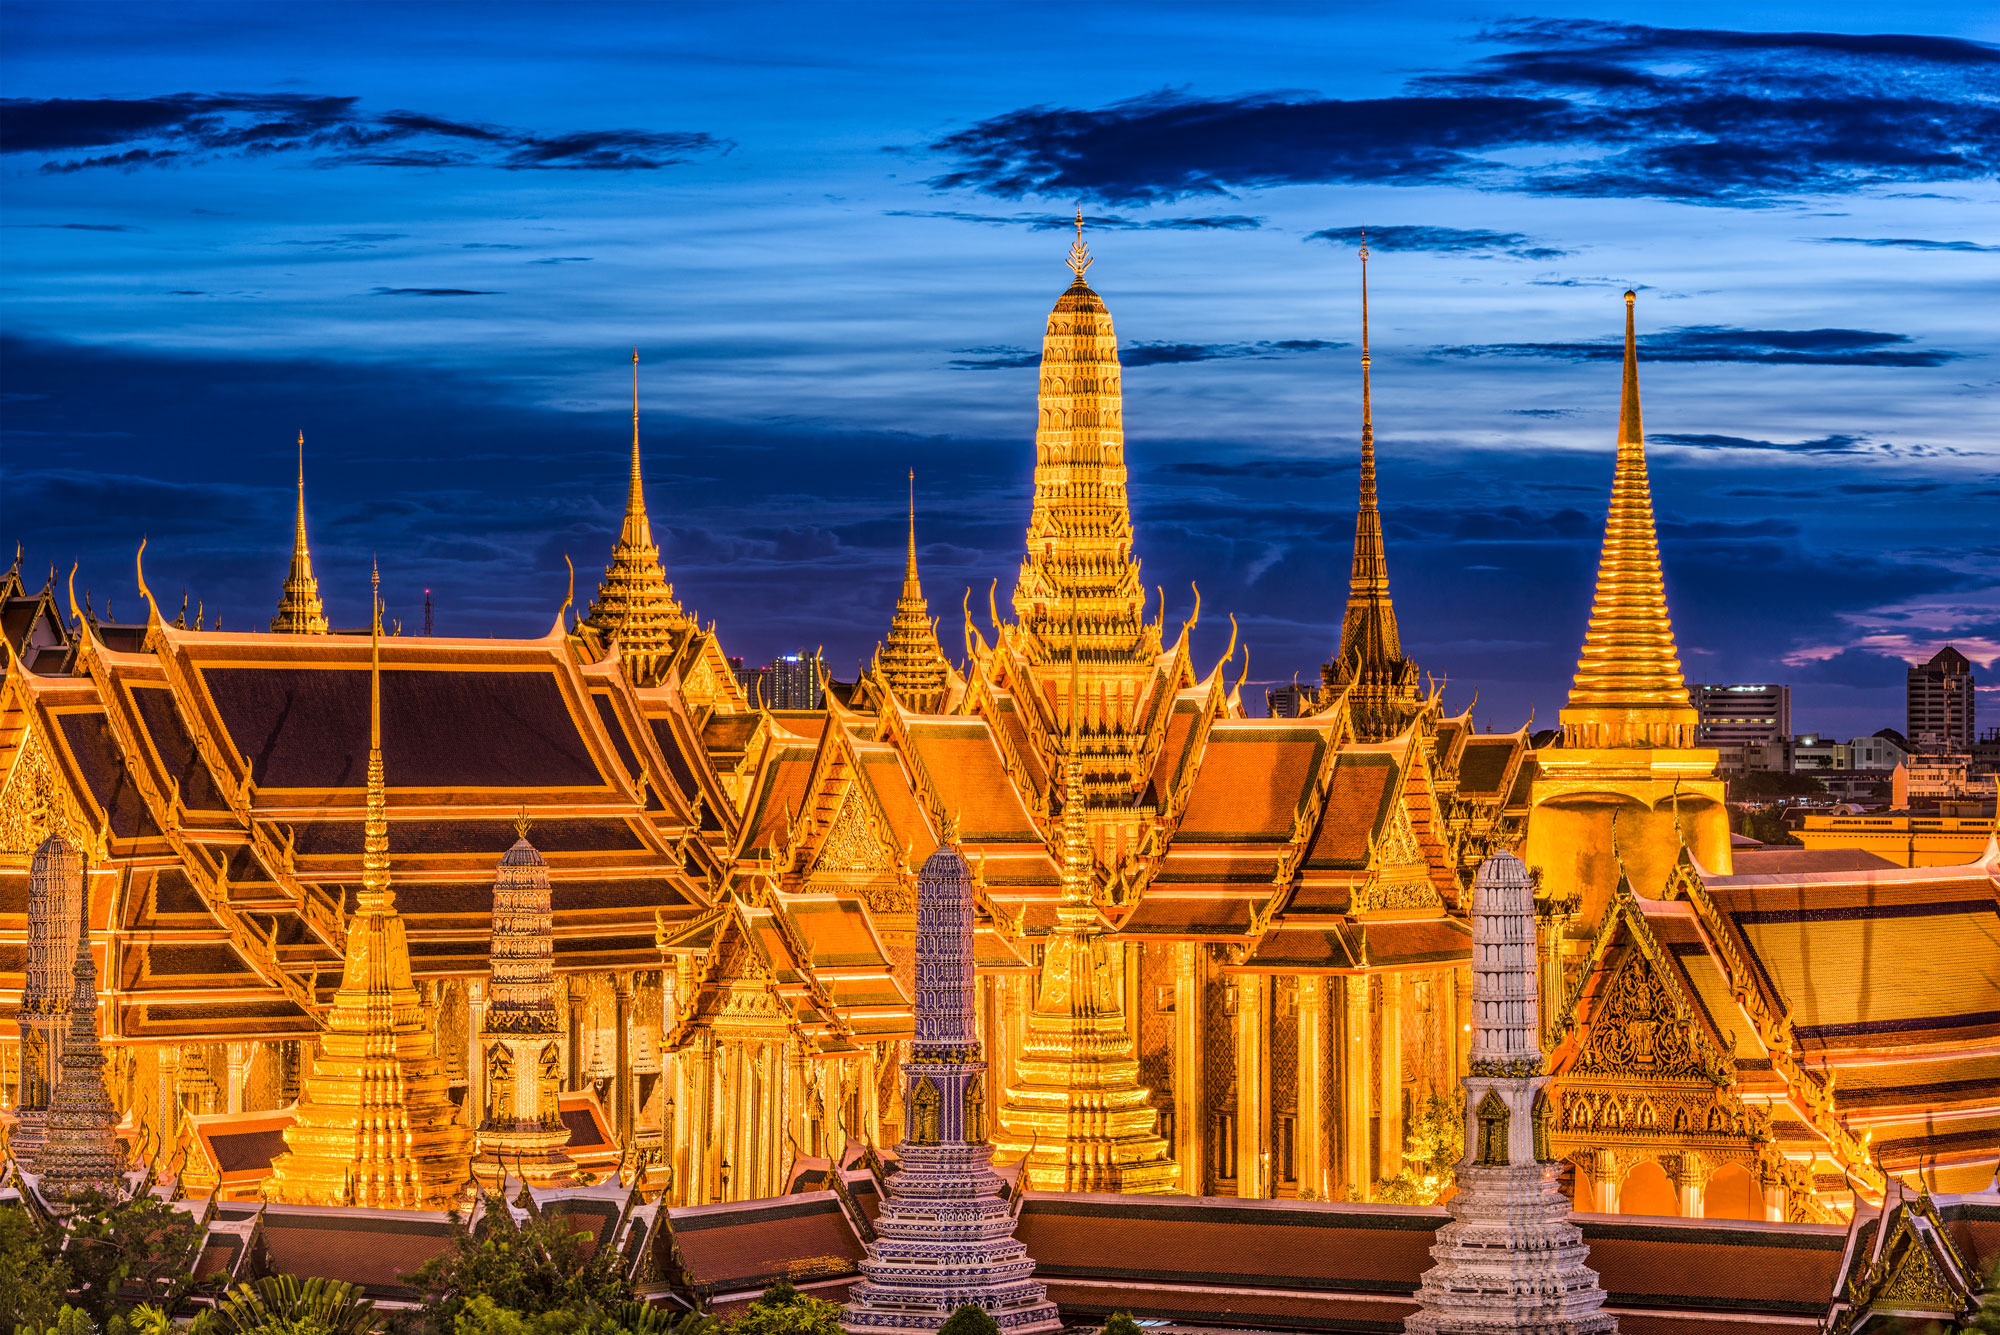 The city skyline of Bangkok, Thailand is a sight to behold. Get your Thailand visa for green card holders to visit this magical land.